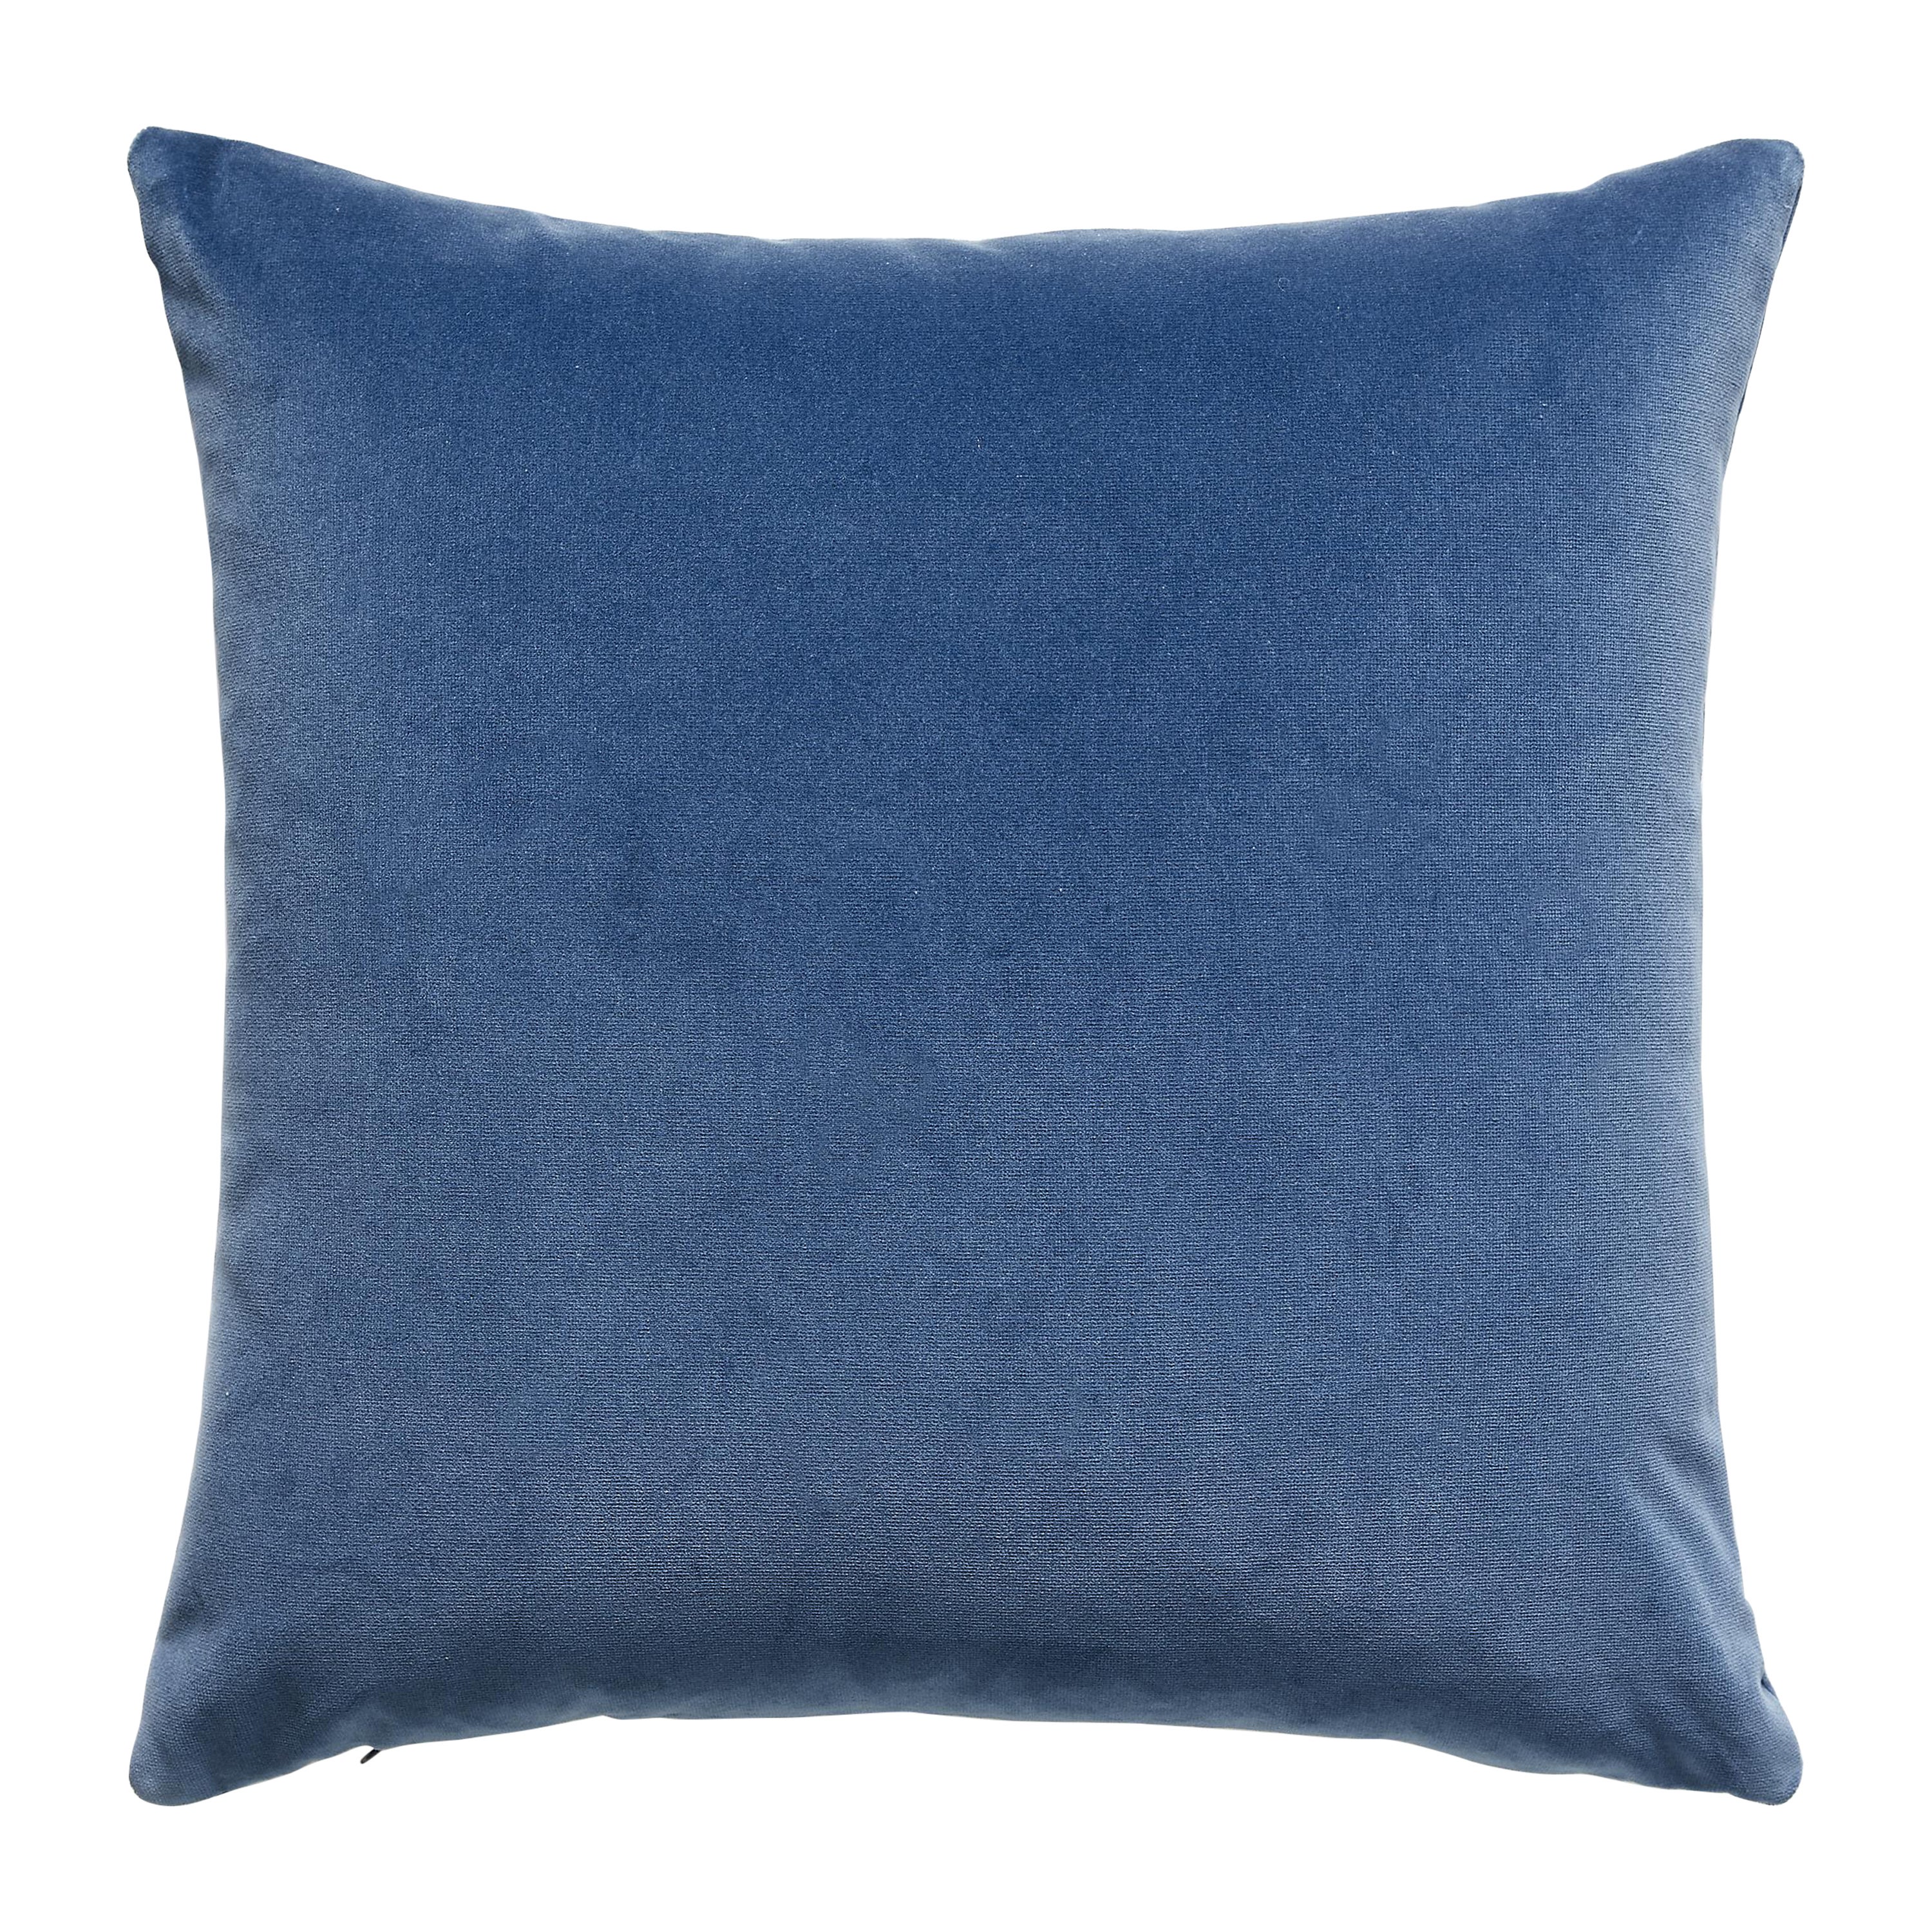 Indus Pillow For Sale